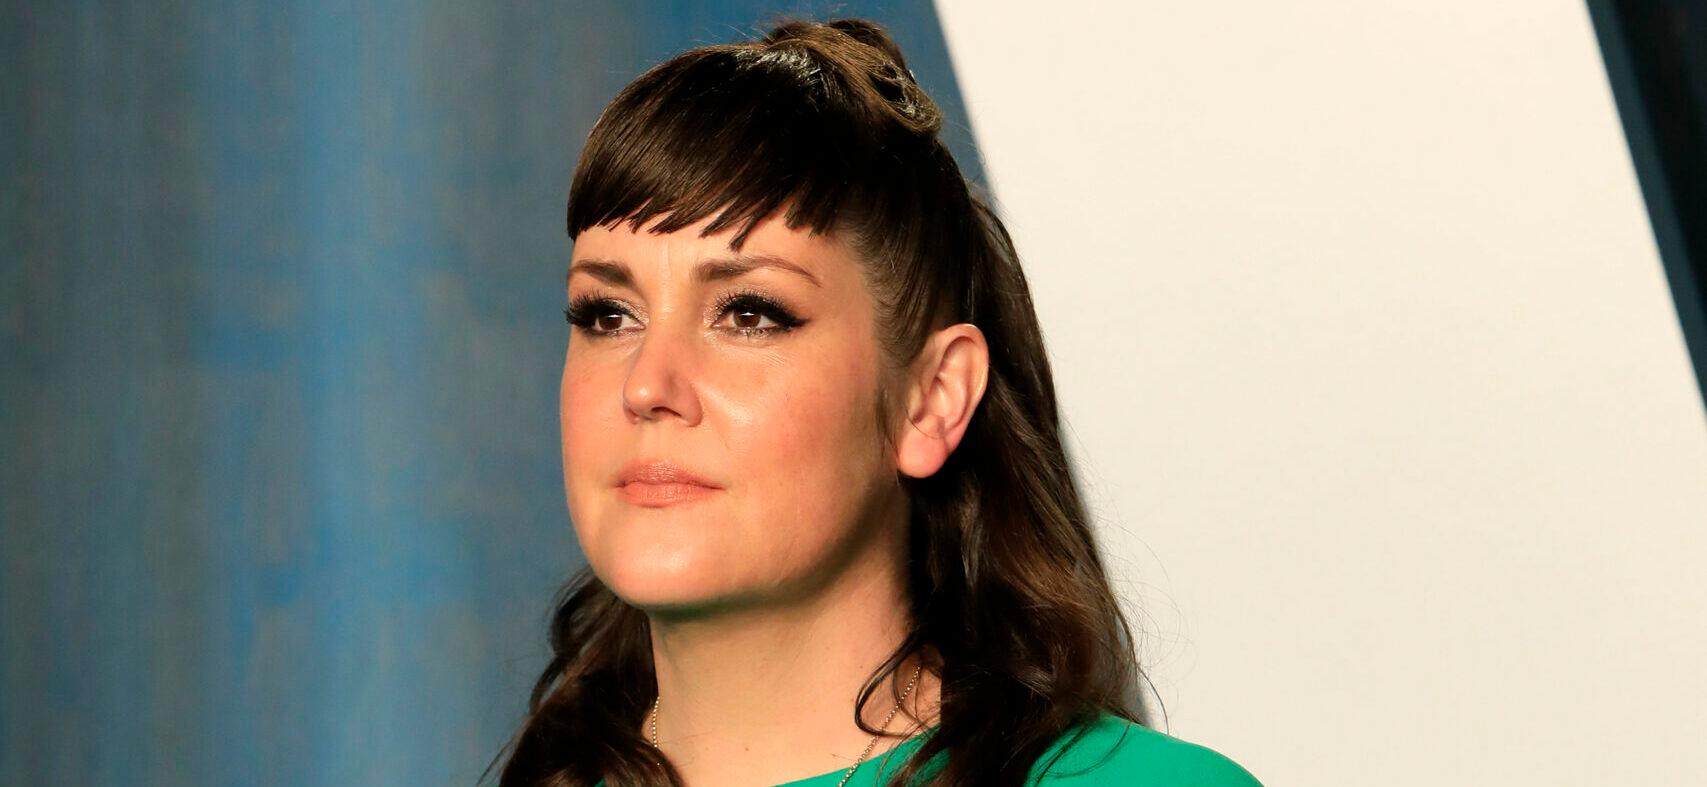 Melanie Lynskey at the Vanity Fair Oscar Party at Wallis Annenberg Center for the Performing Arts